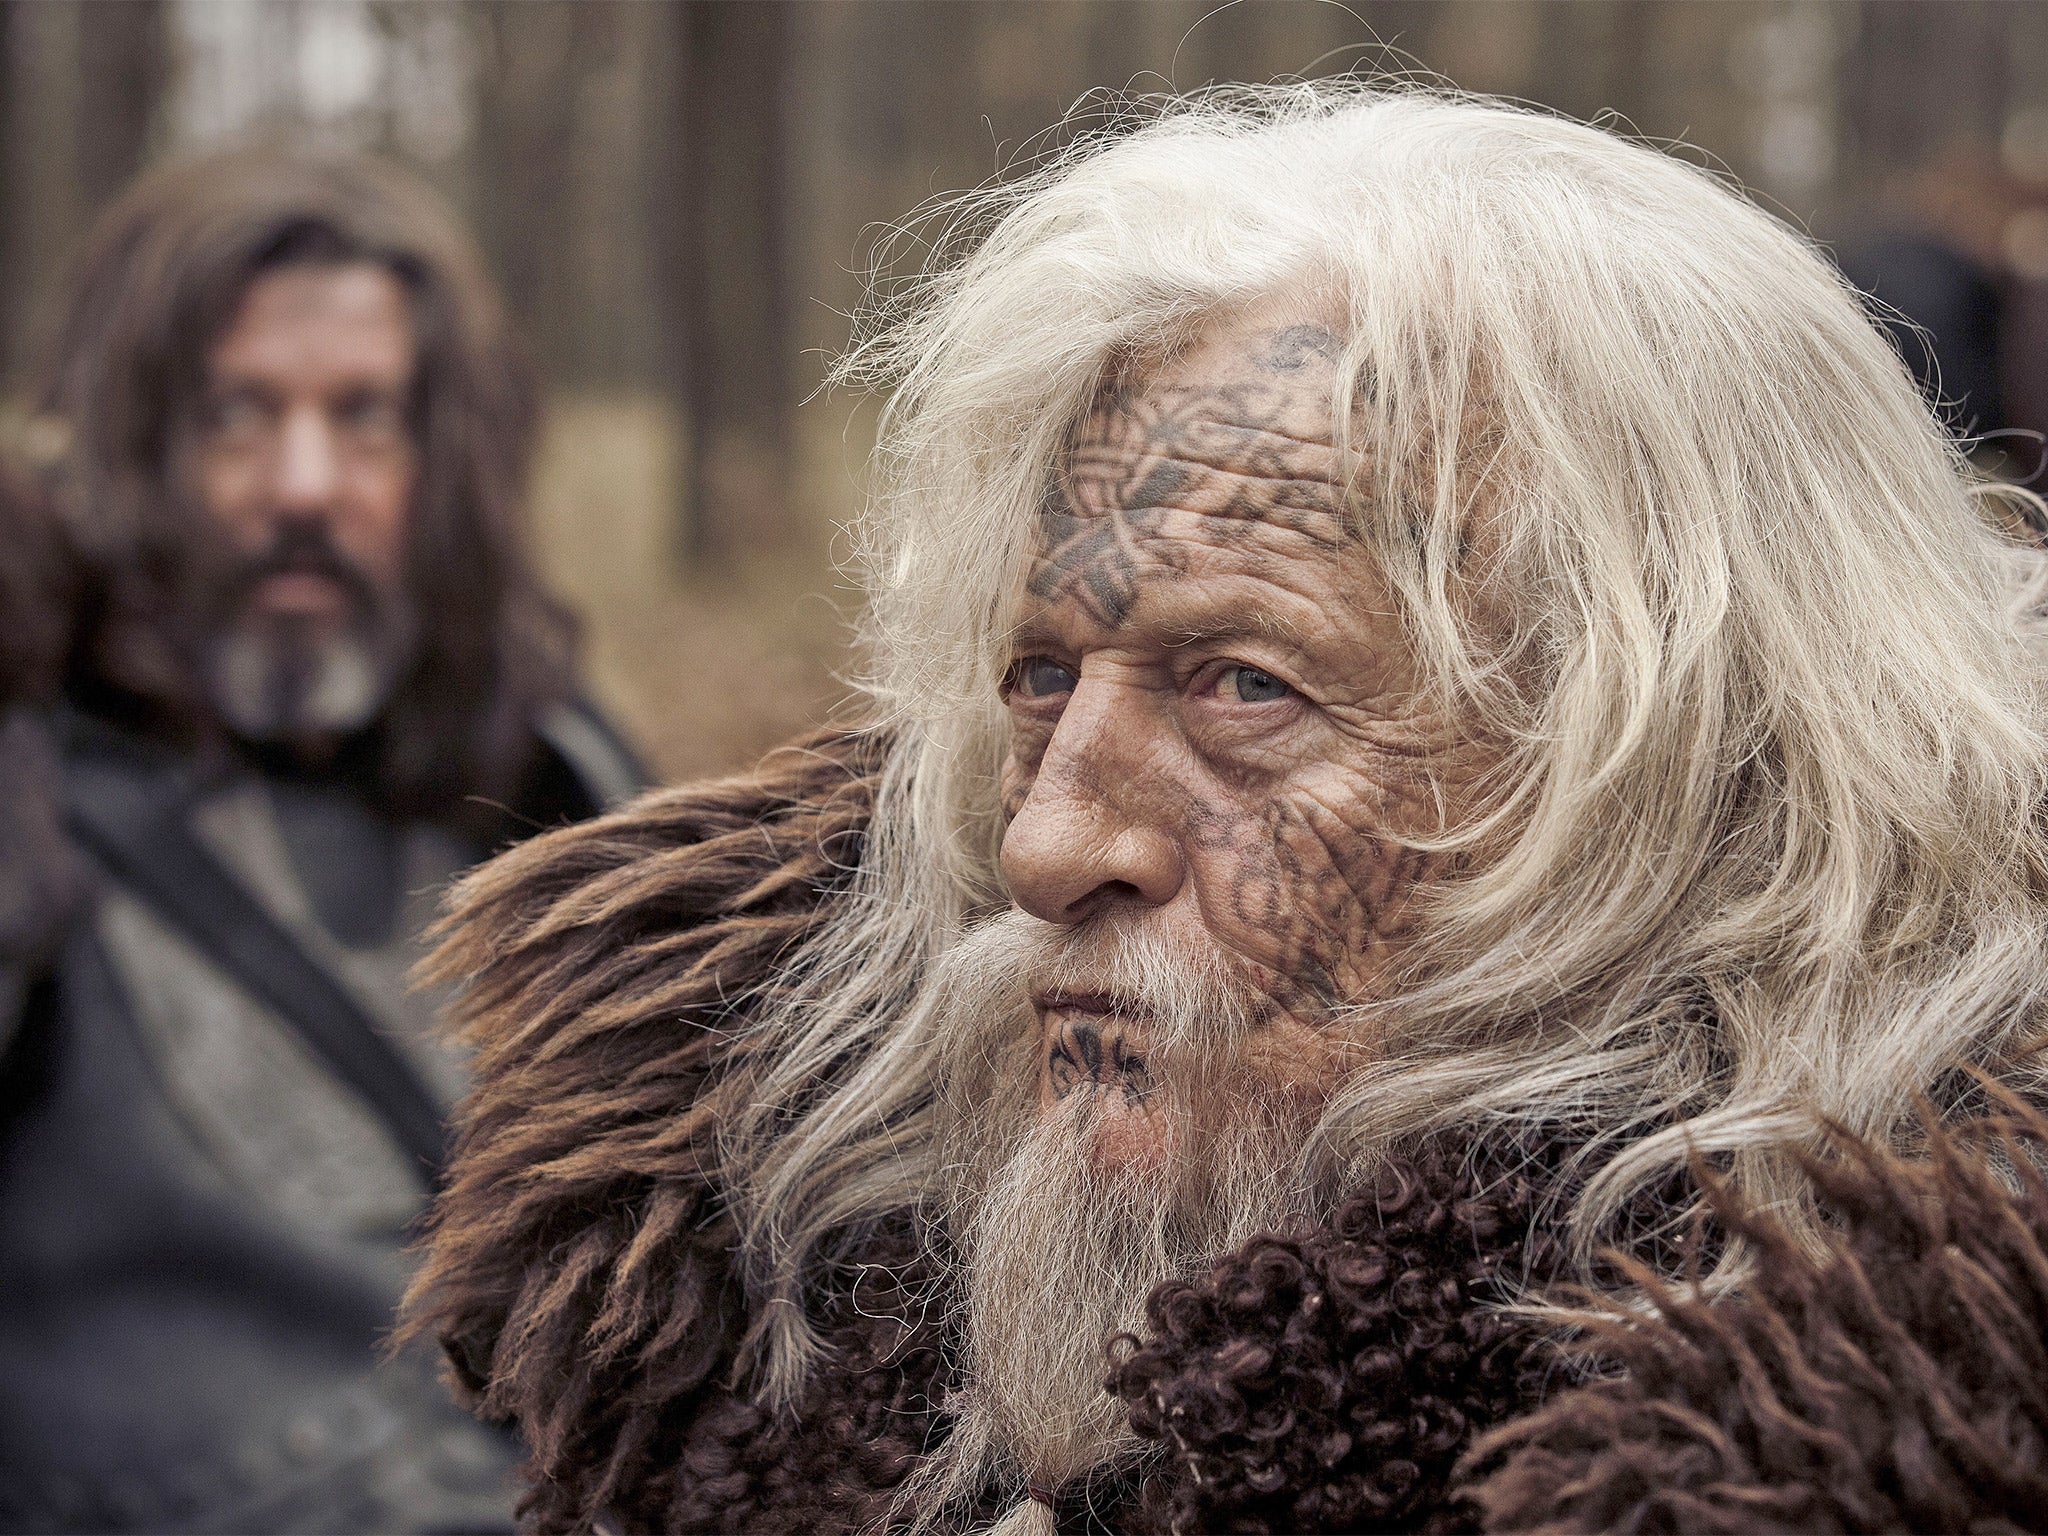 Rutger Hauer as Ravn in the new medieval drama